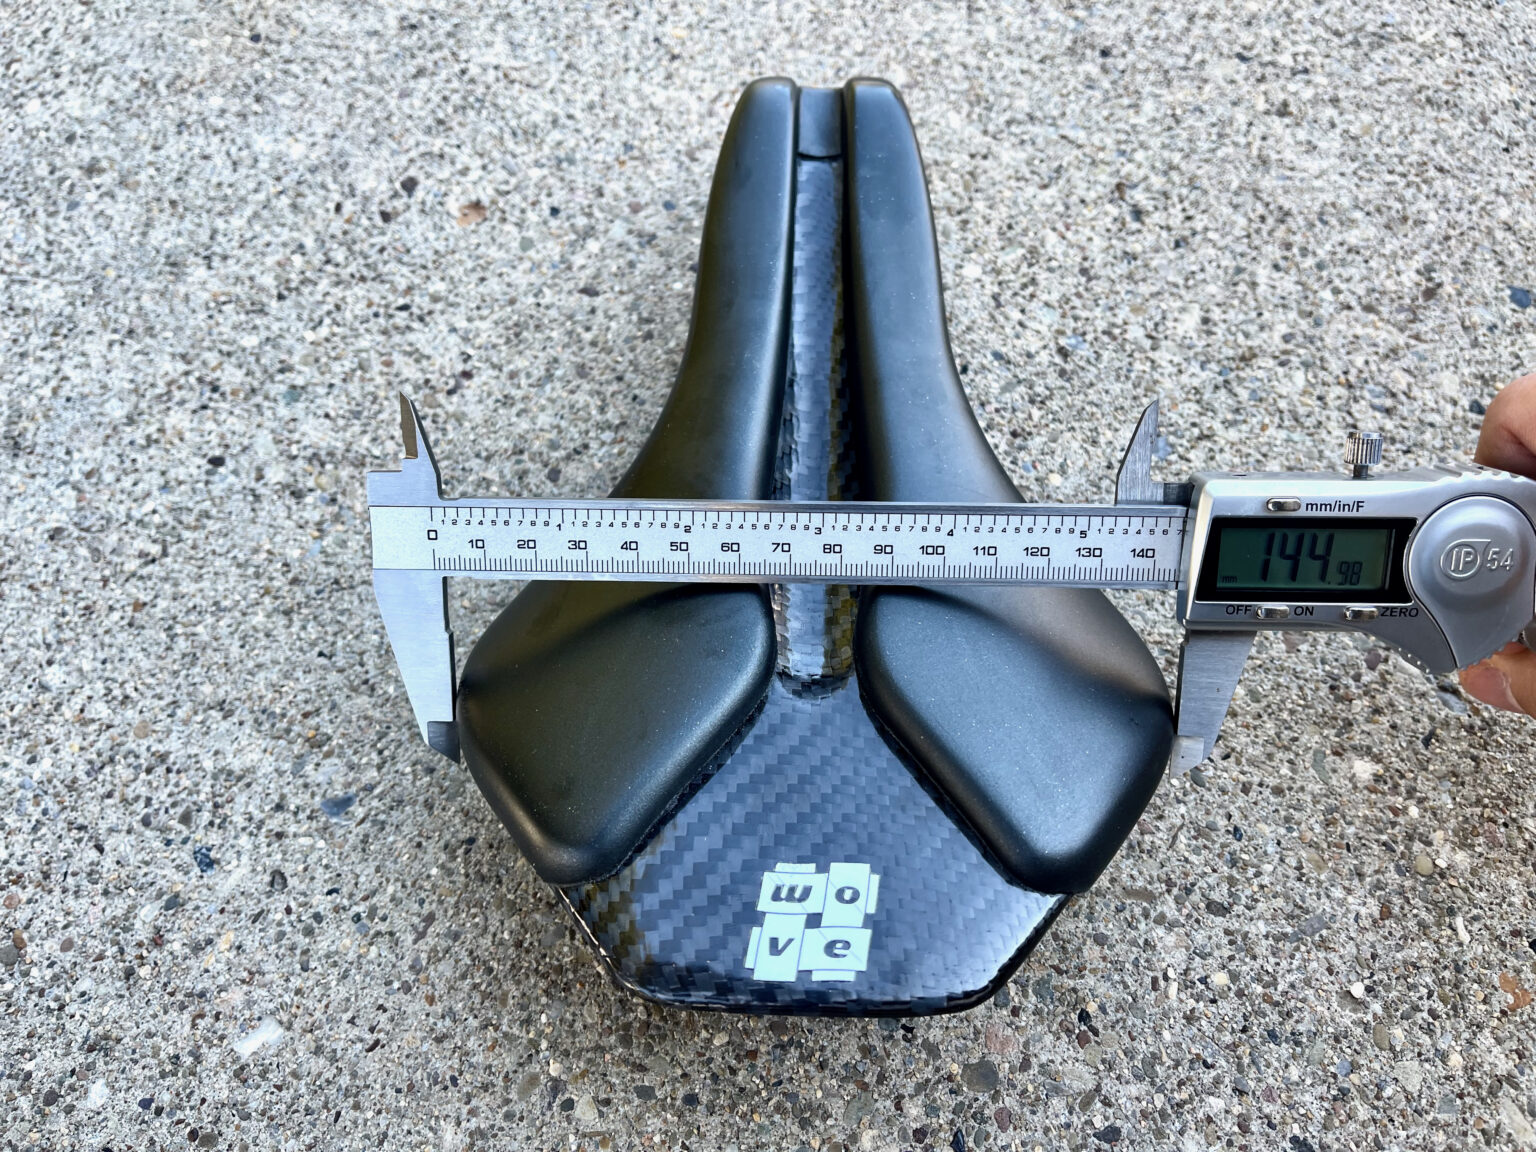 WOVE Mags Saddle Review detail number measurements full seat padding